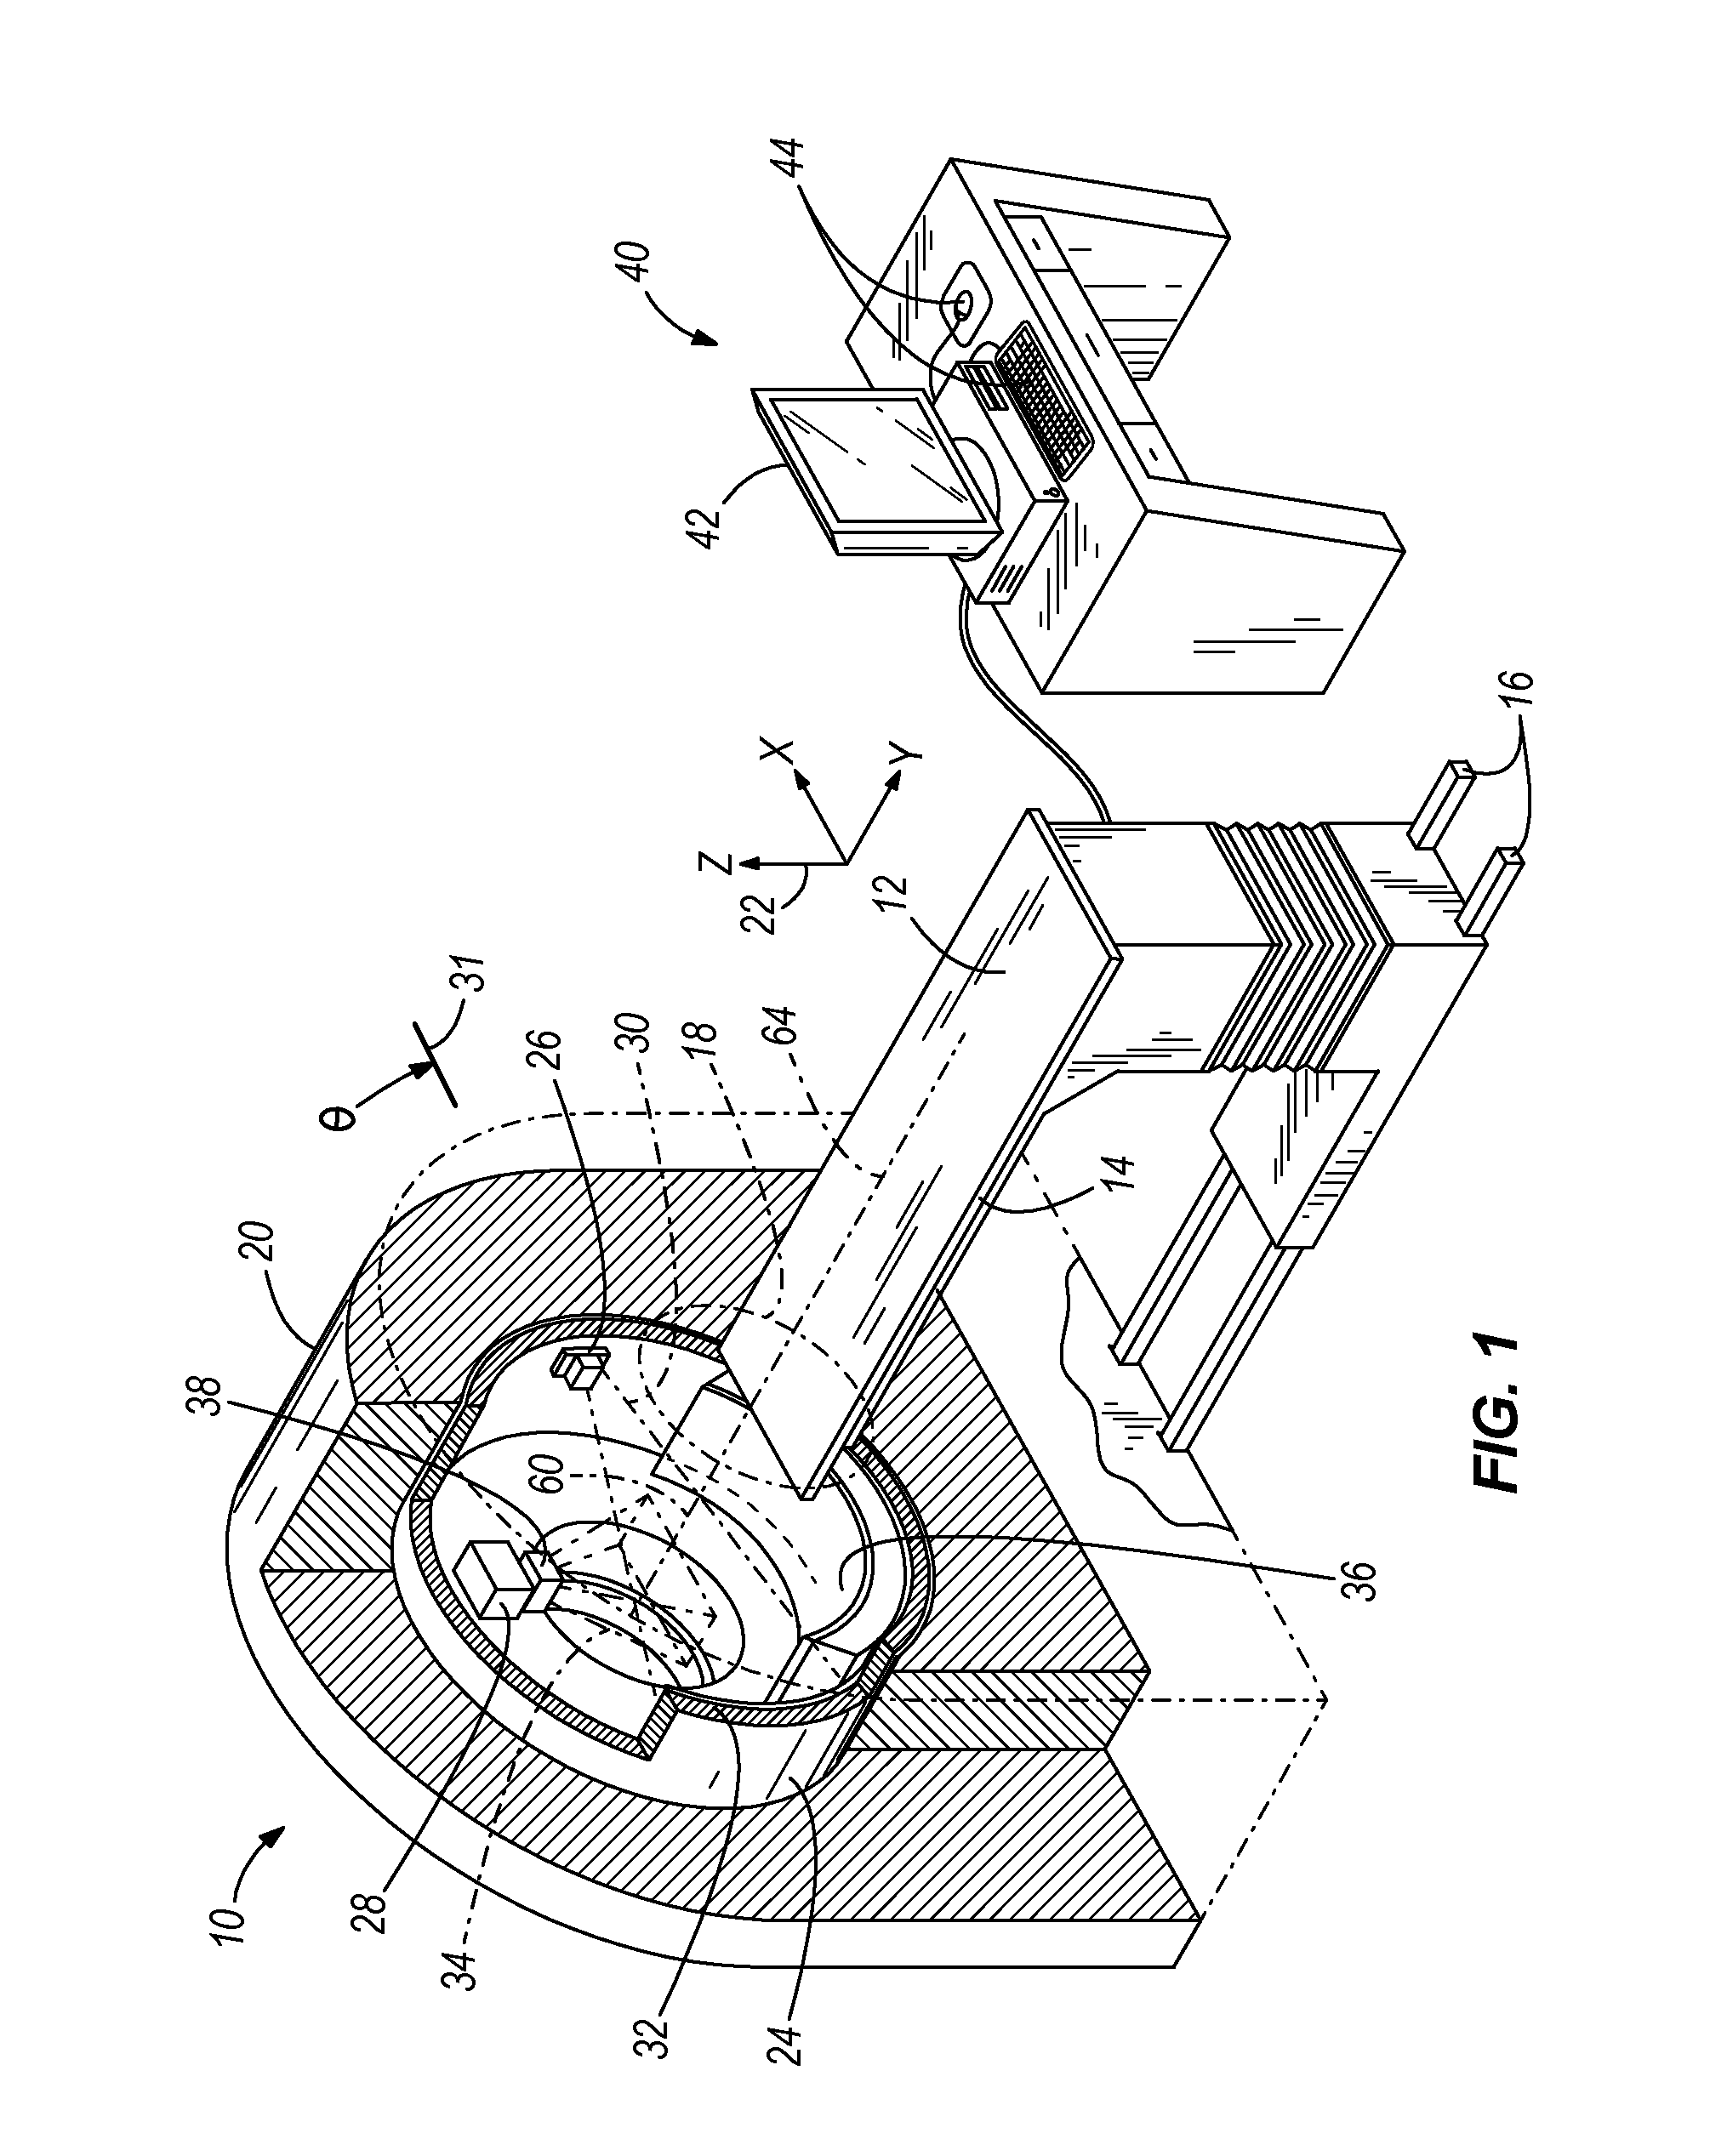 Method for modification of radiotherapy treatment delivery